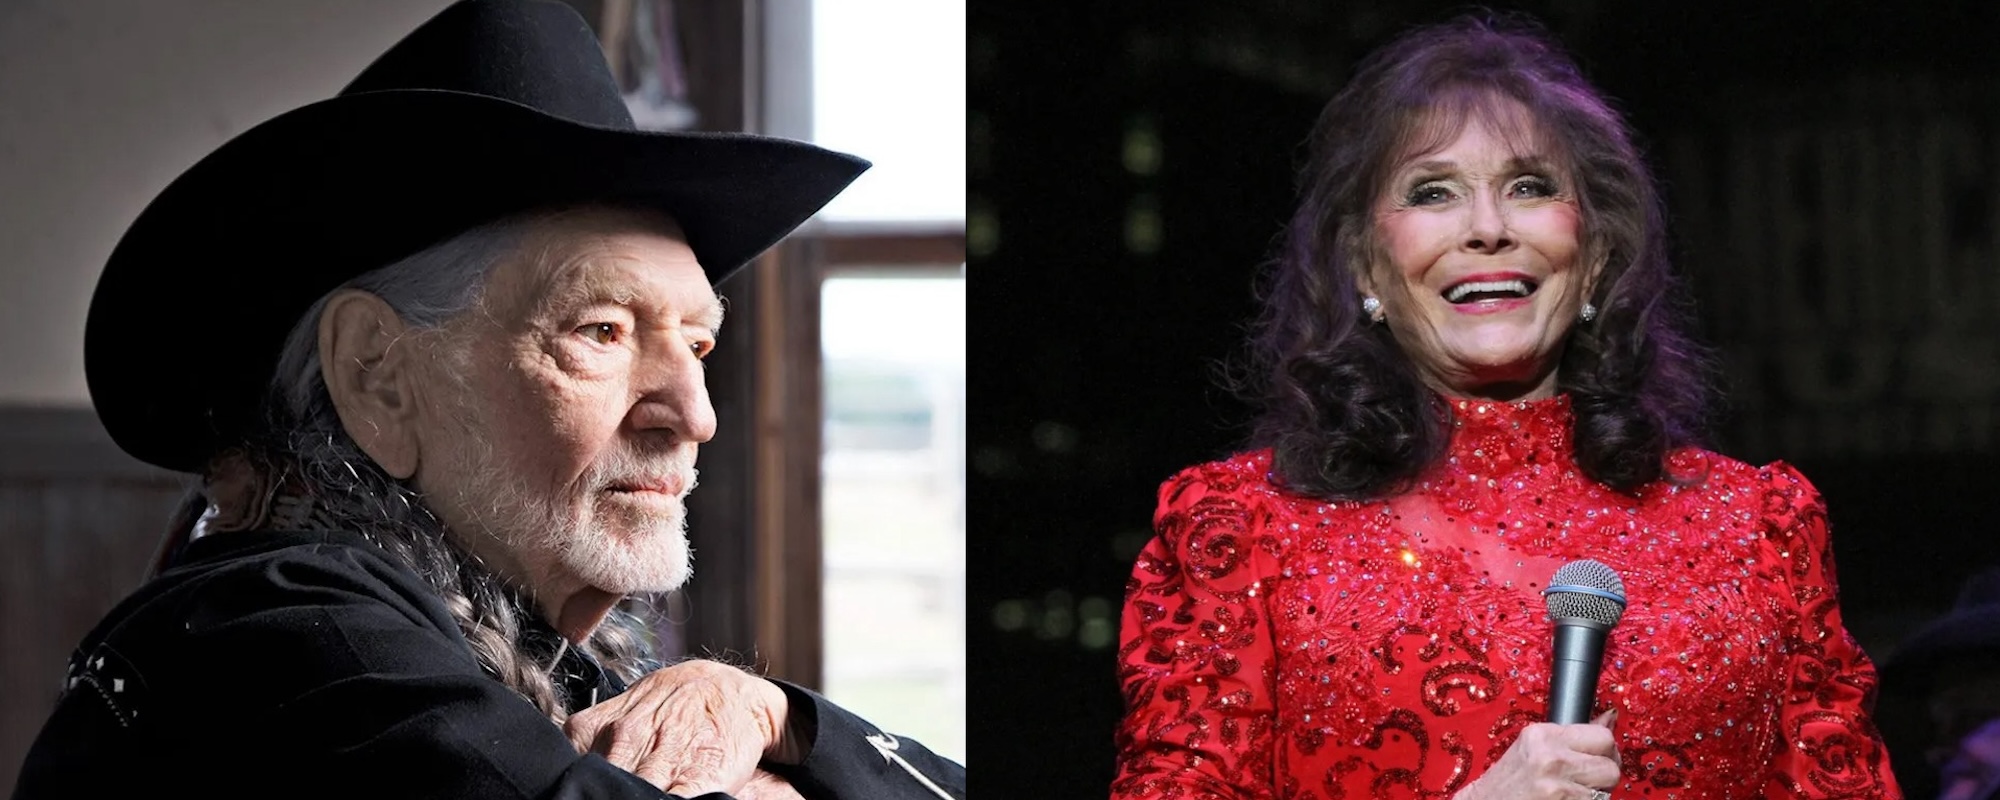 Full Circle: The Story Behind the First and Only Duet Between Loretta Lynn and Willie Nelson, “Lay Me Down”